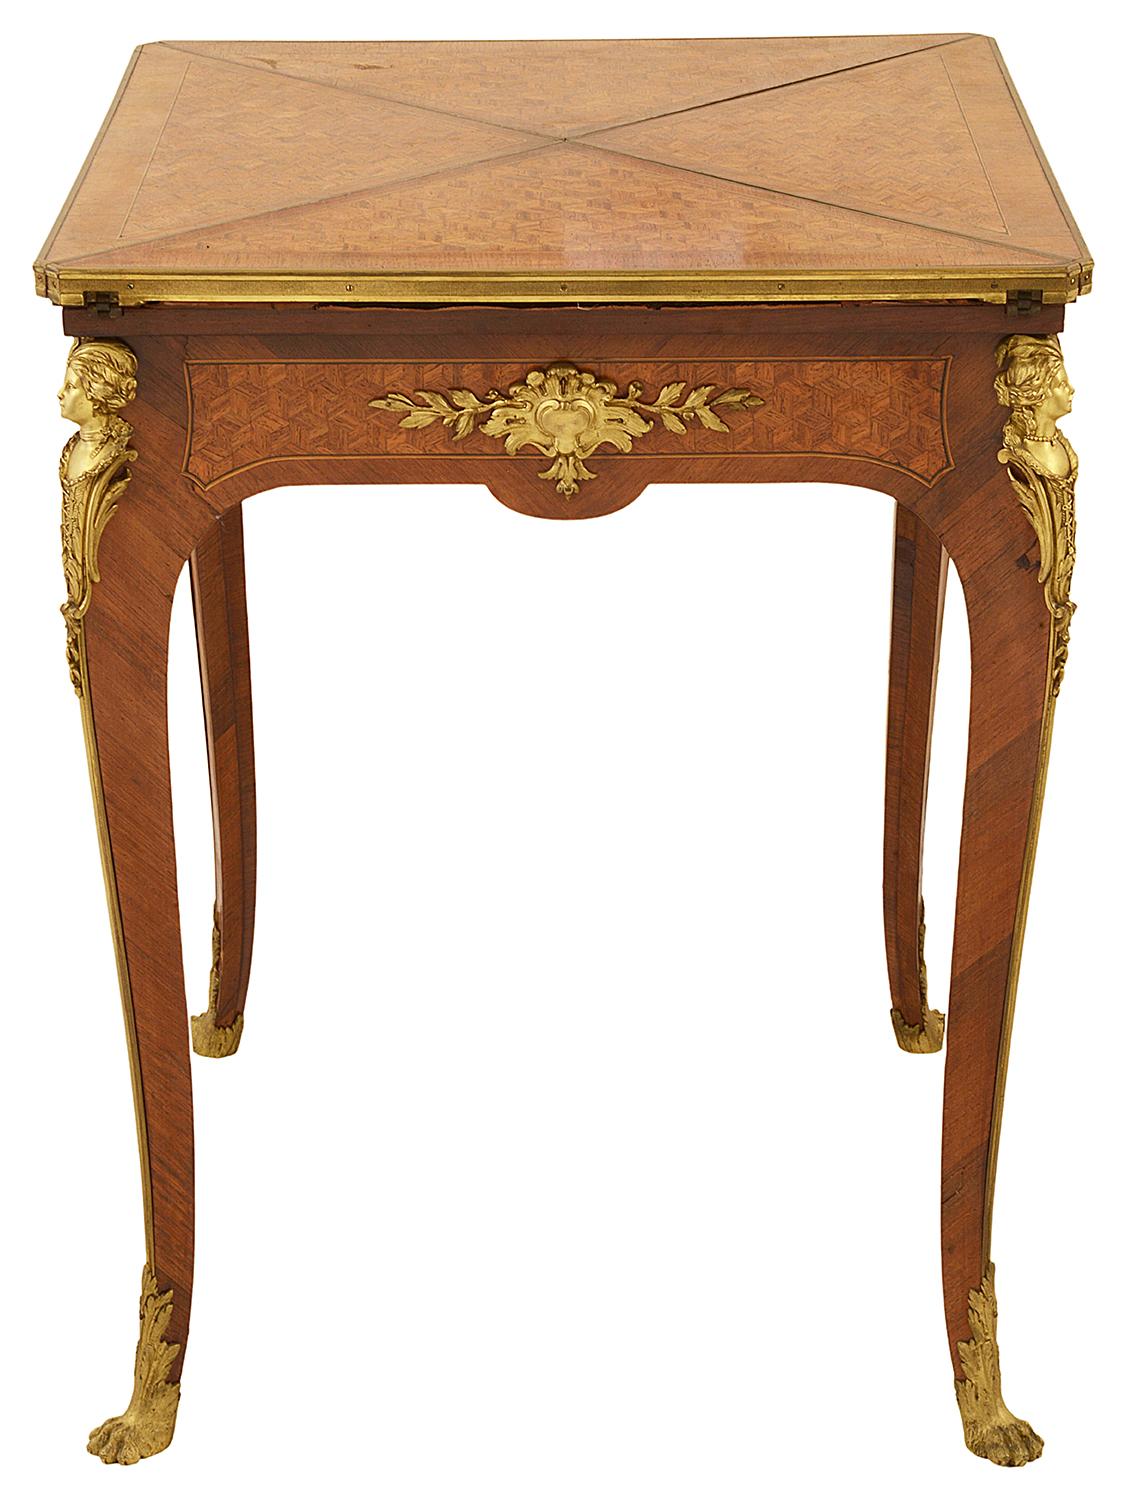 A fine quality late 19th Century French Louis XVI style parquetry inlaid envelope card table. Having wonderful gilded ormolu mouldings, monopodia and claw foot mounts. The quartered hinged top opens to reveal an inset baize covered games table.